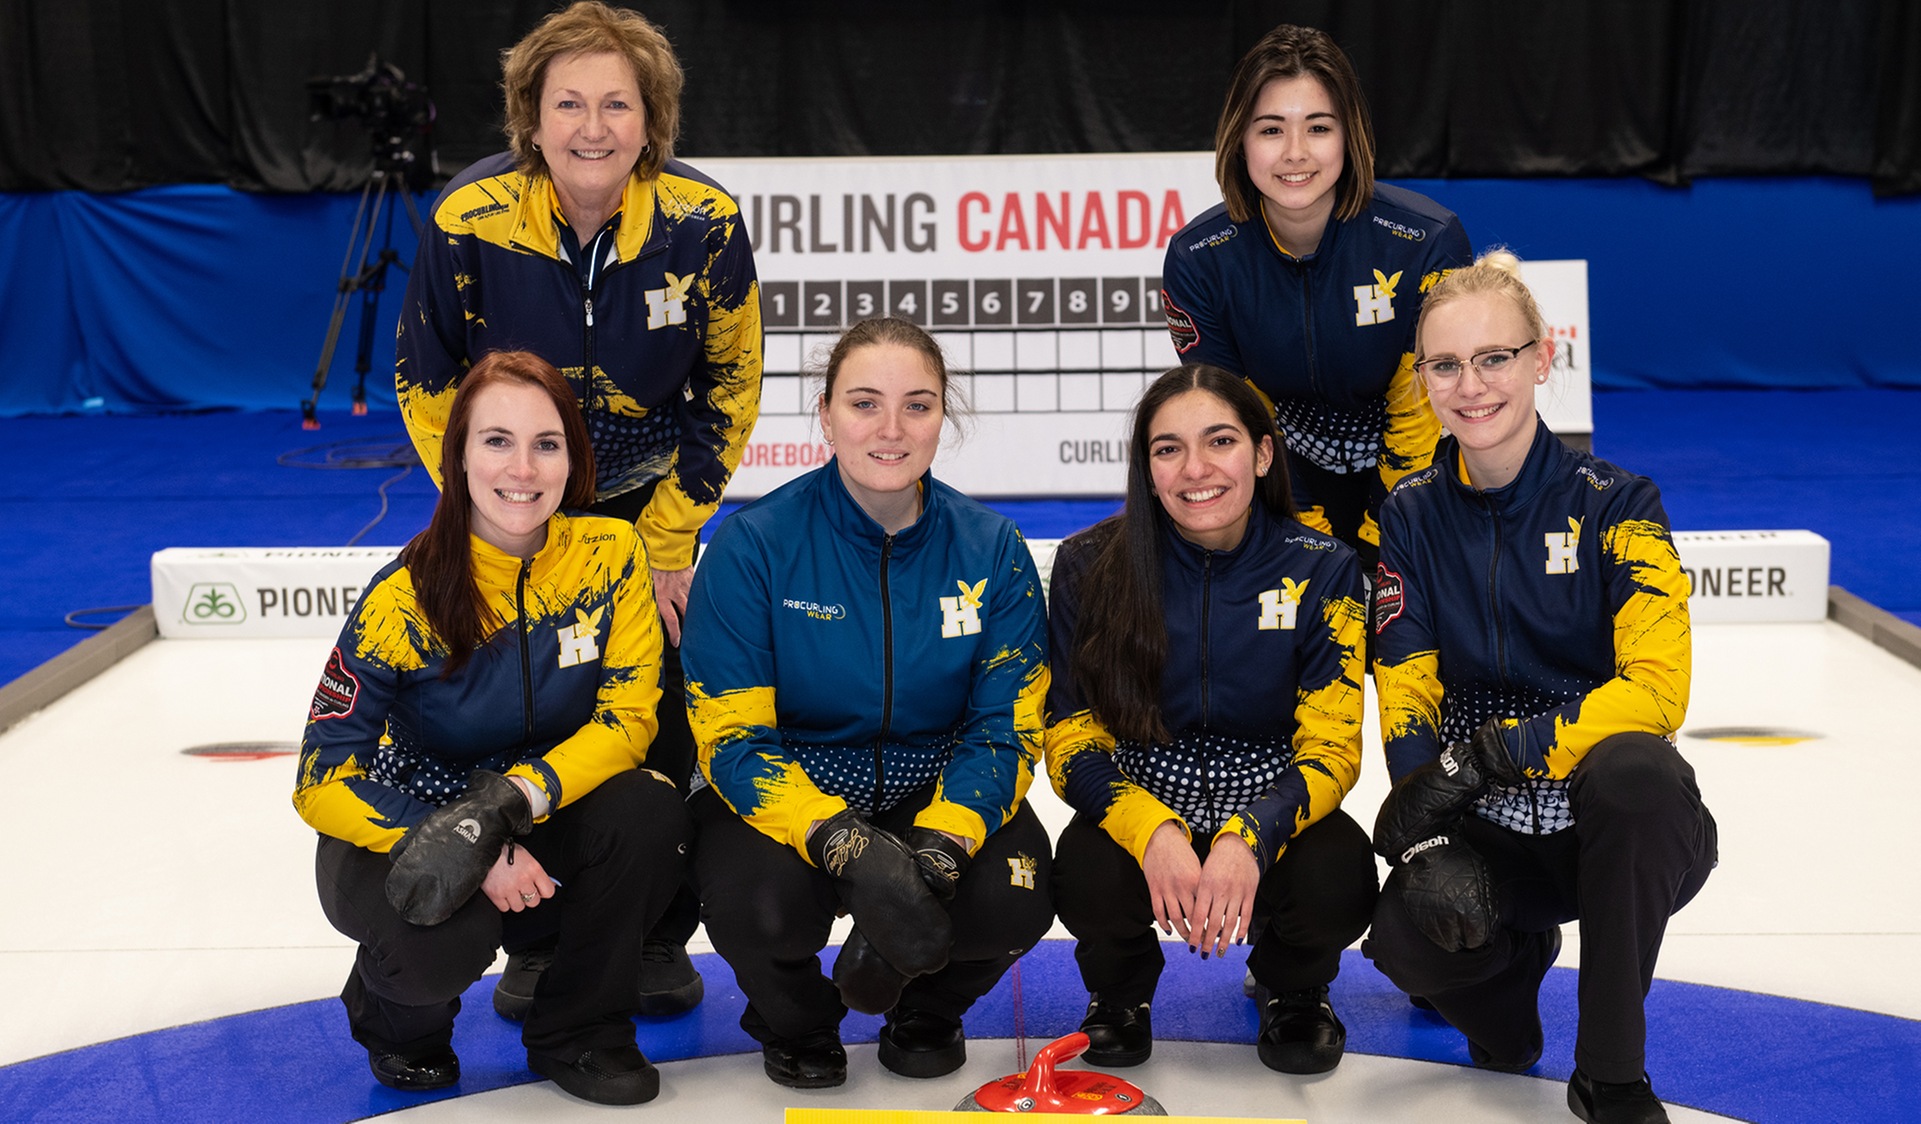 HAWKS WOMEN SPLIT OPENING DAY AT CURLING NATIONALS